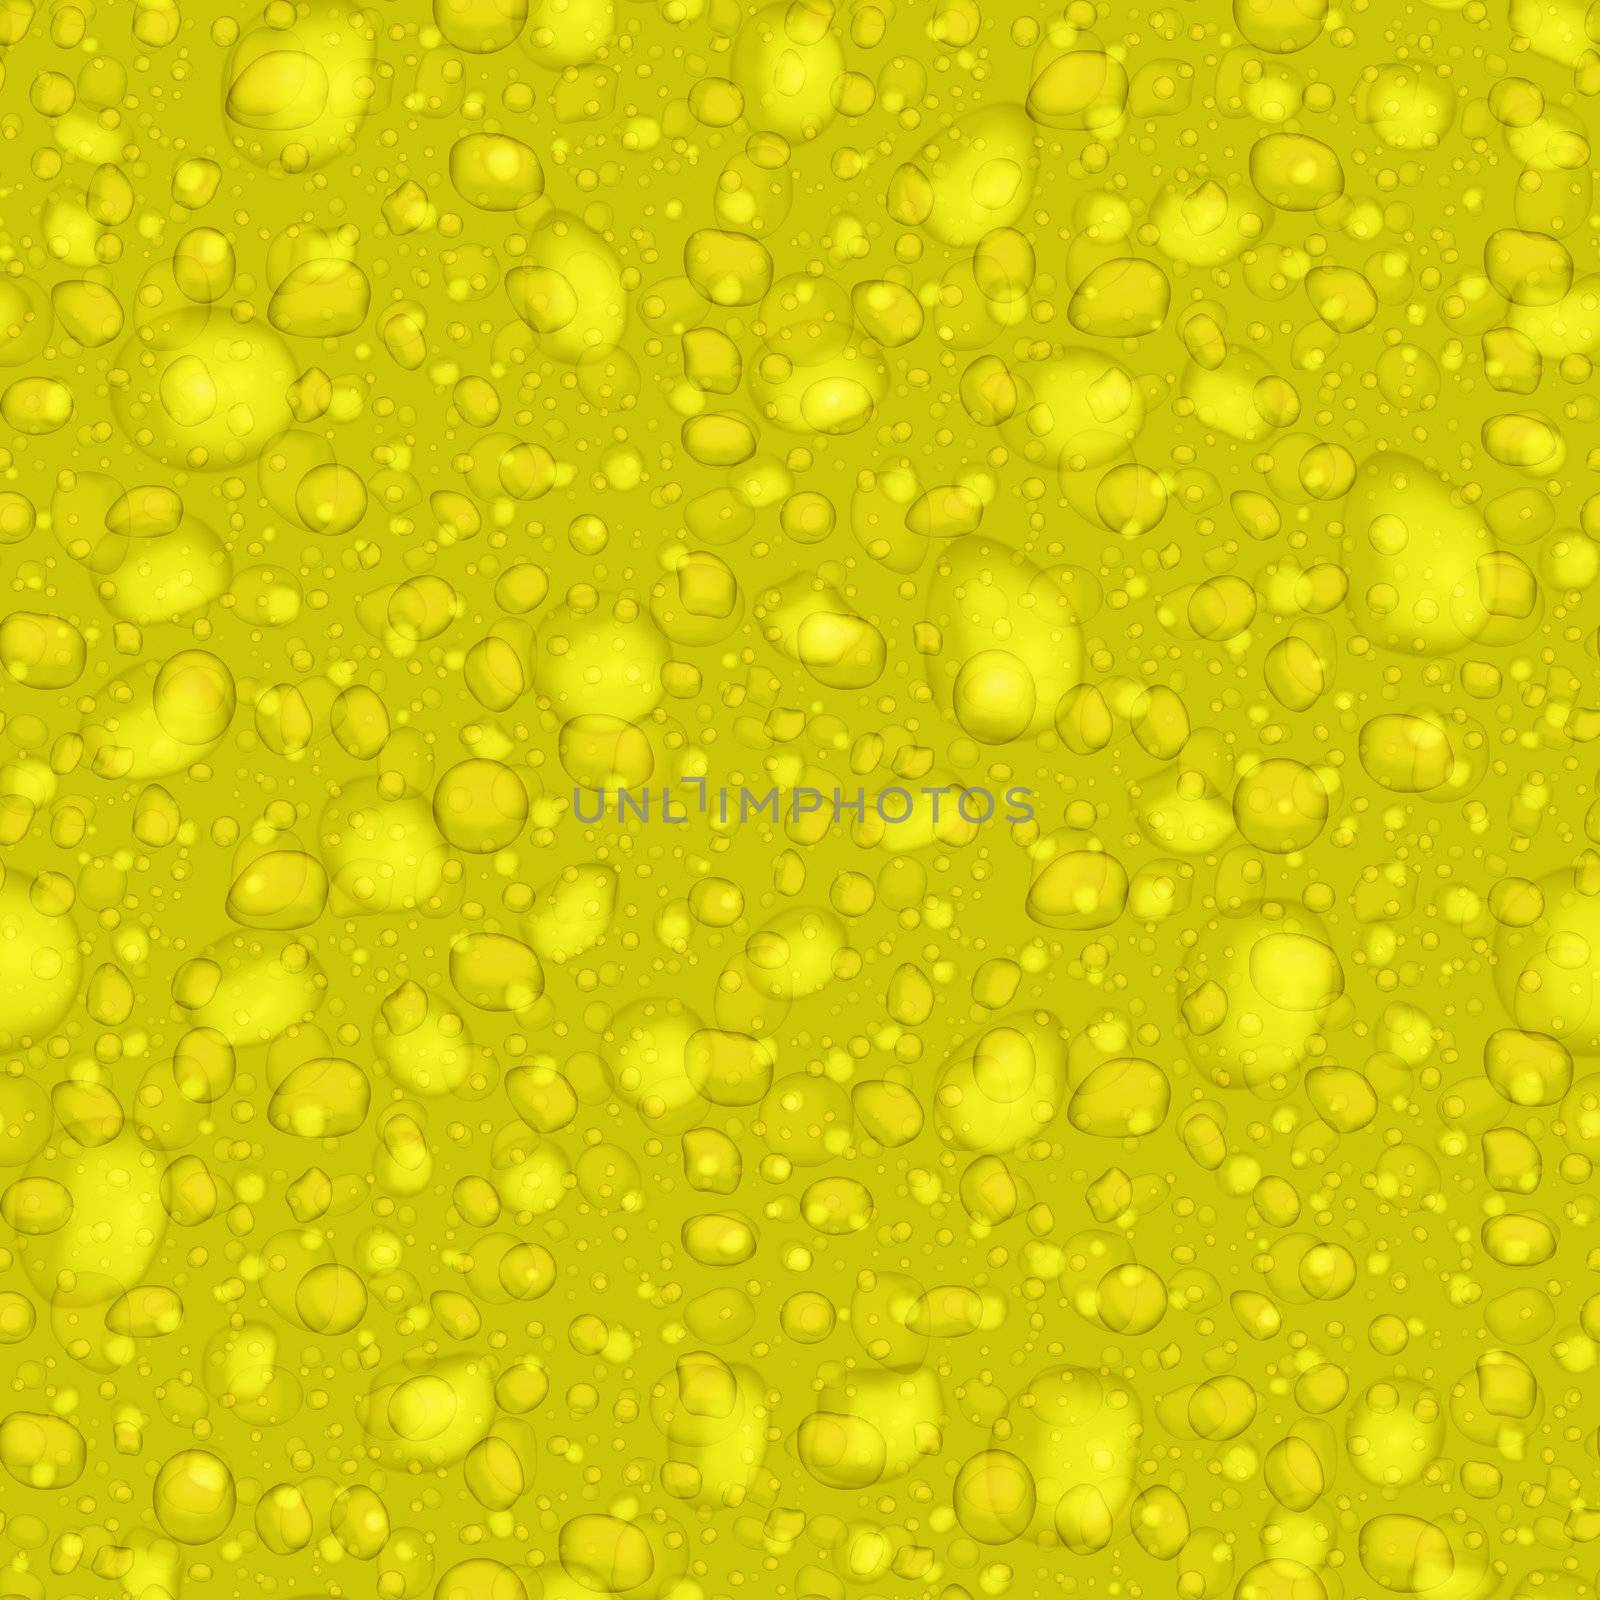 Spray on yellow background - abstract seamless texture by pzaxe